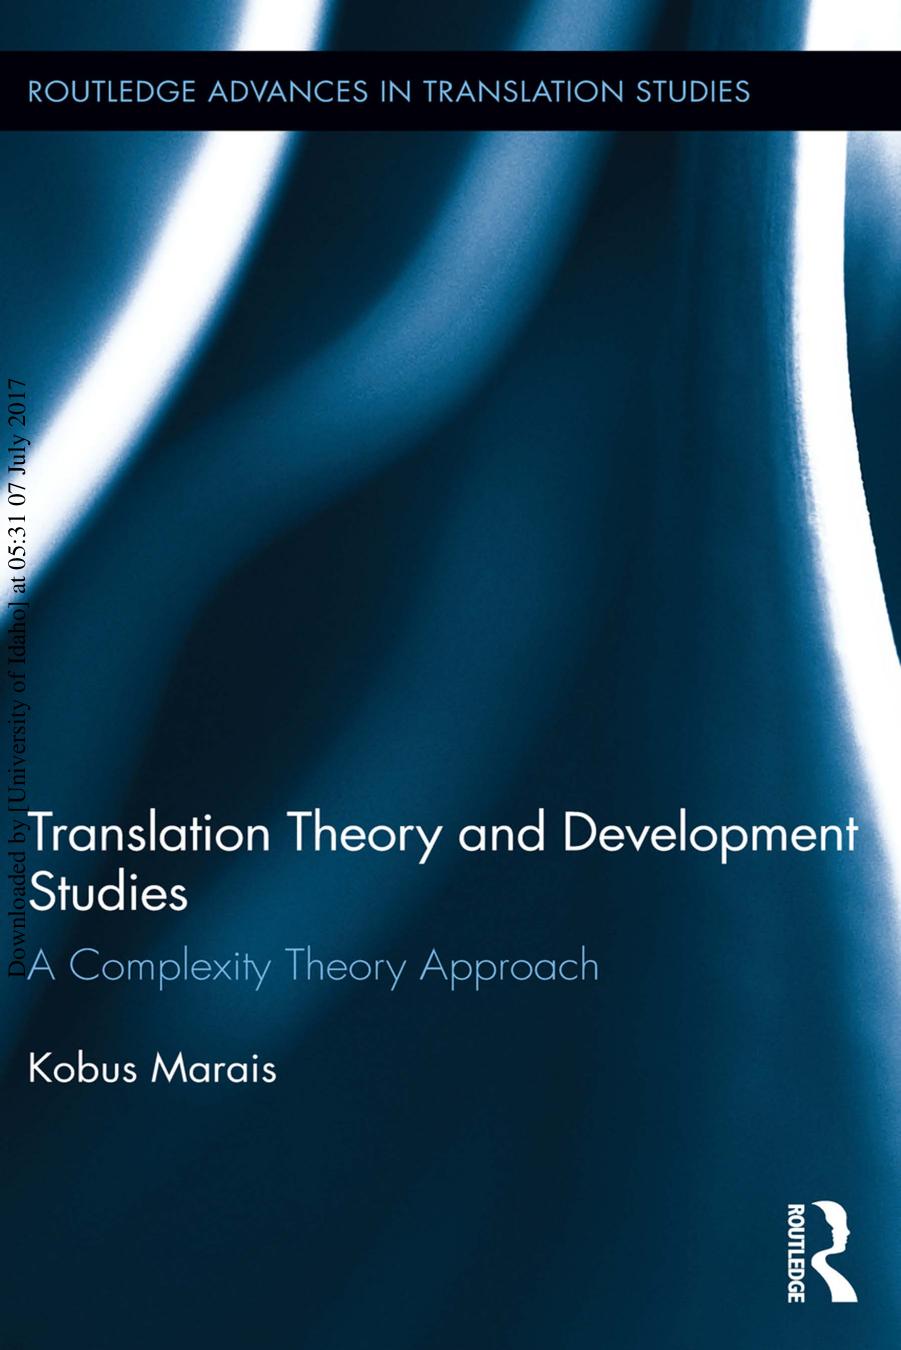 Translation Theory and Development Studies  A Complexity Theory Approach-Routledge (2014)